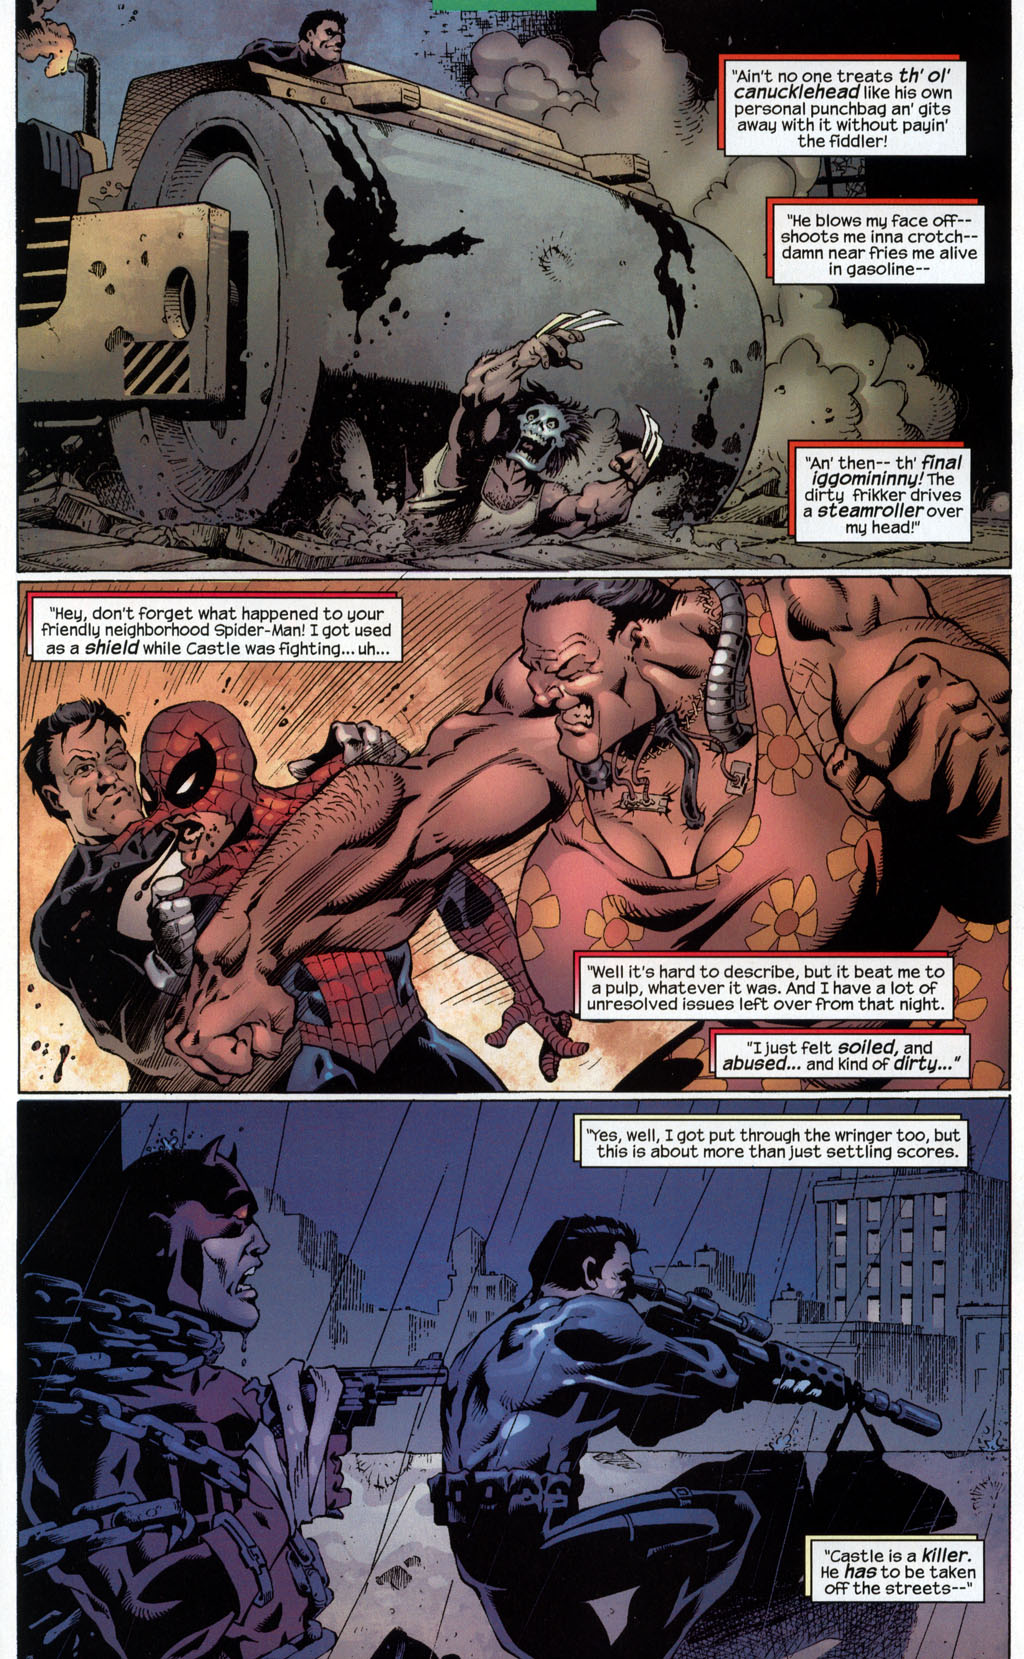 The Punisher (2001) issue 33 - Confederacy of Dunces #01 - Page 4